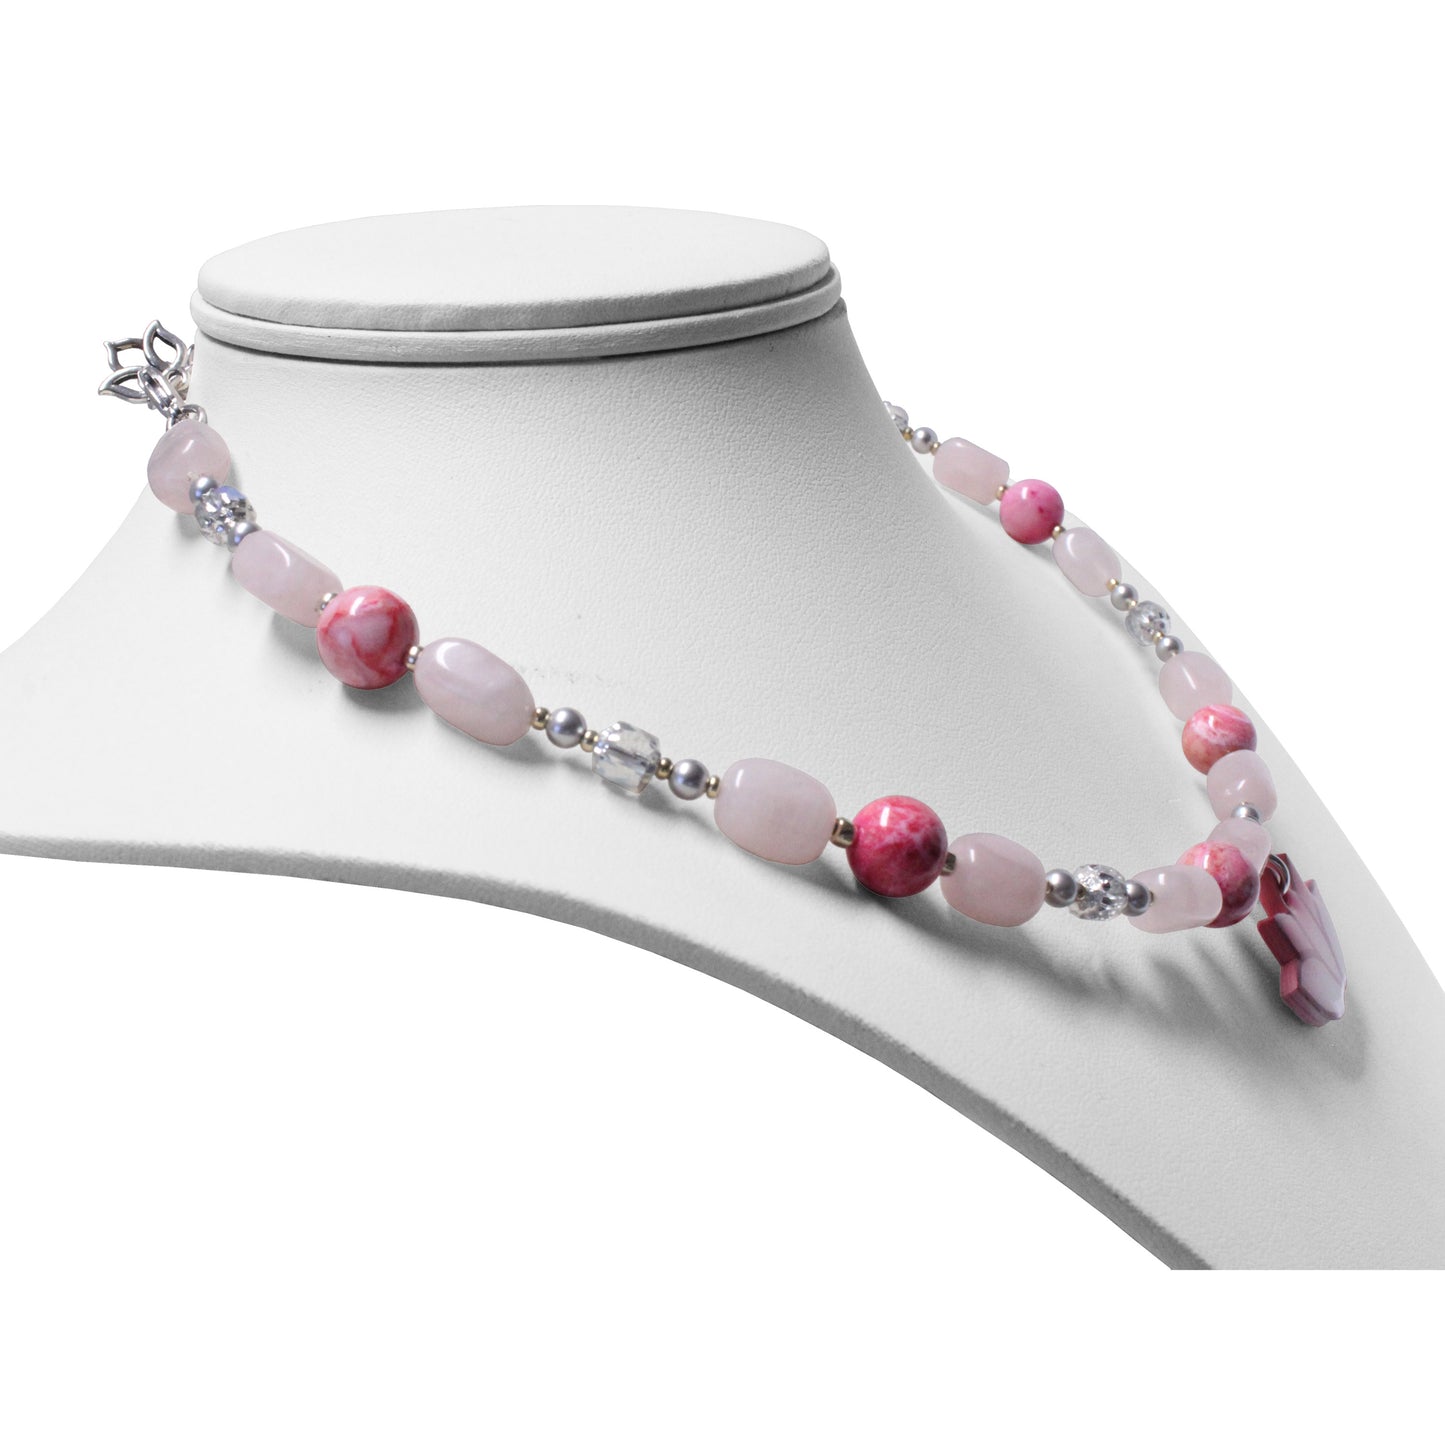 Pink Lotus Necklace / 16-18 Inch length / with rose quartz gemstones / hand-painted pendant